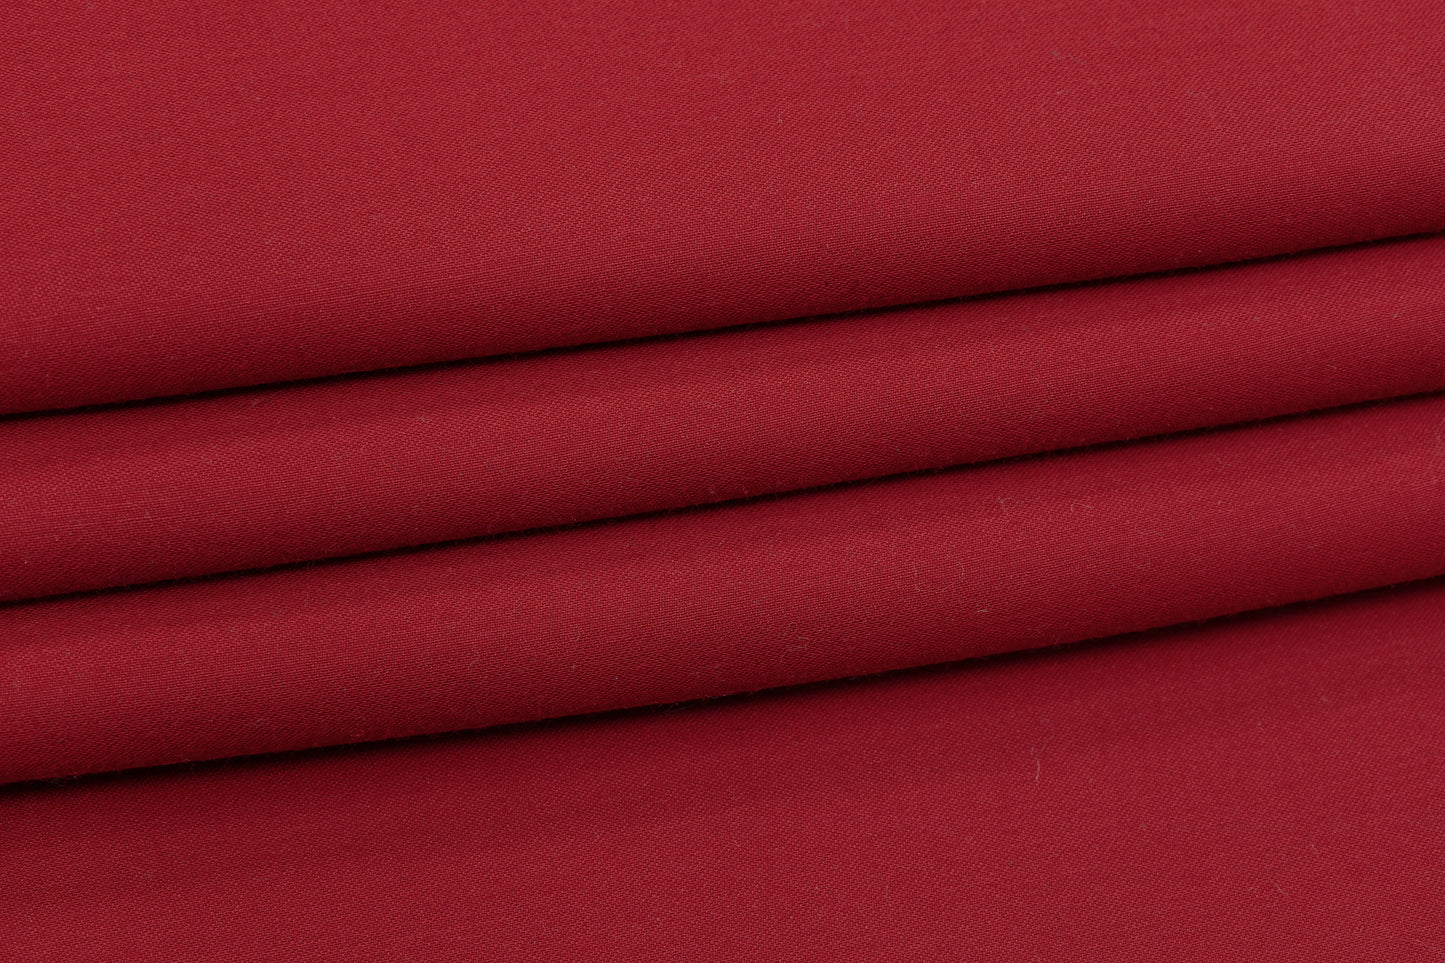 Double Faced Solid Italian Wool - Red